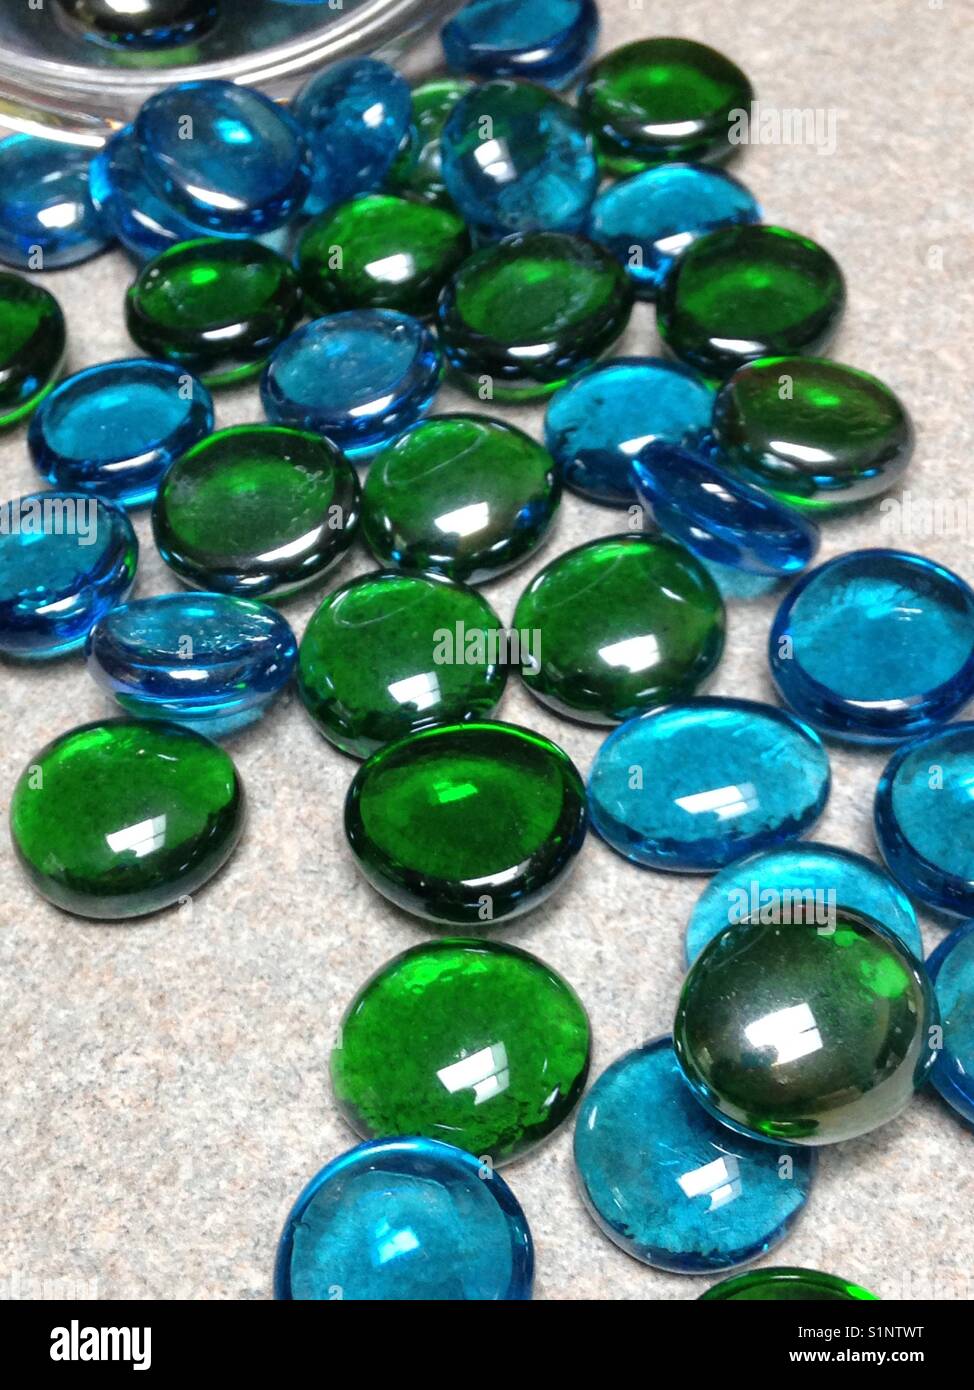 Blue and green stones spilled out of a jar Stock Photo